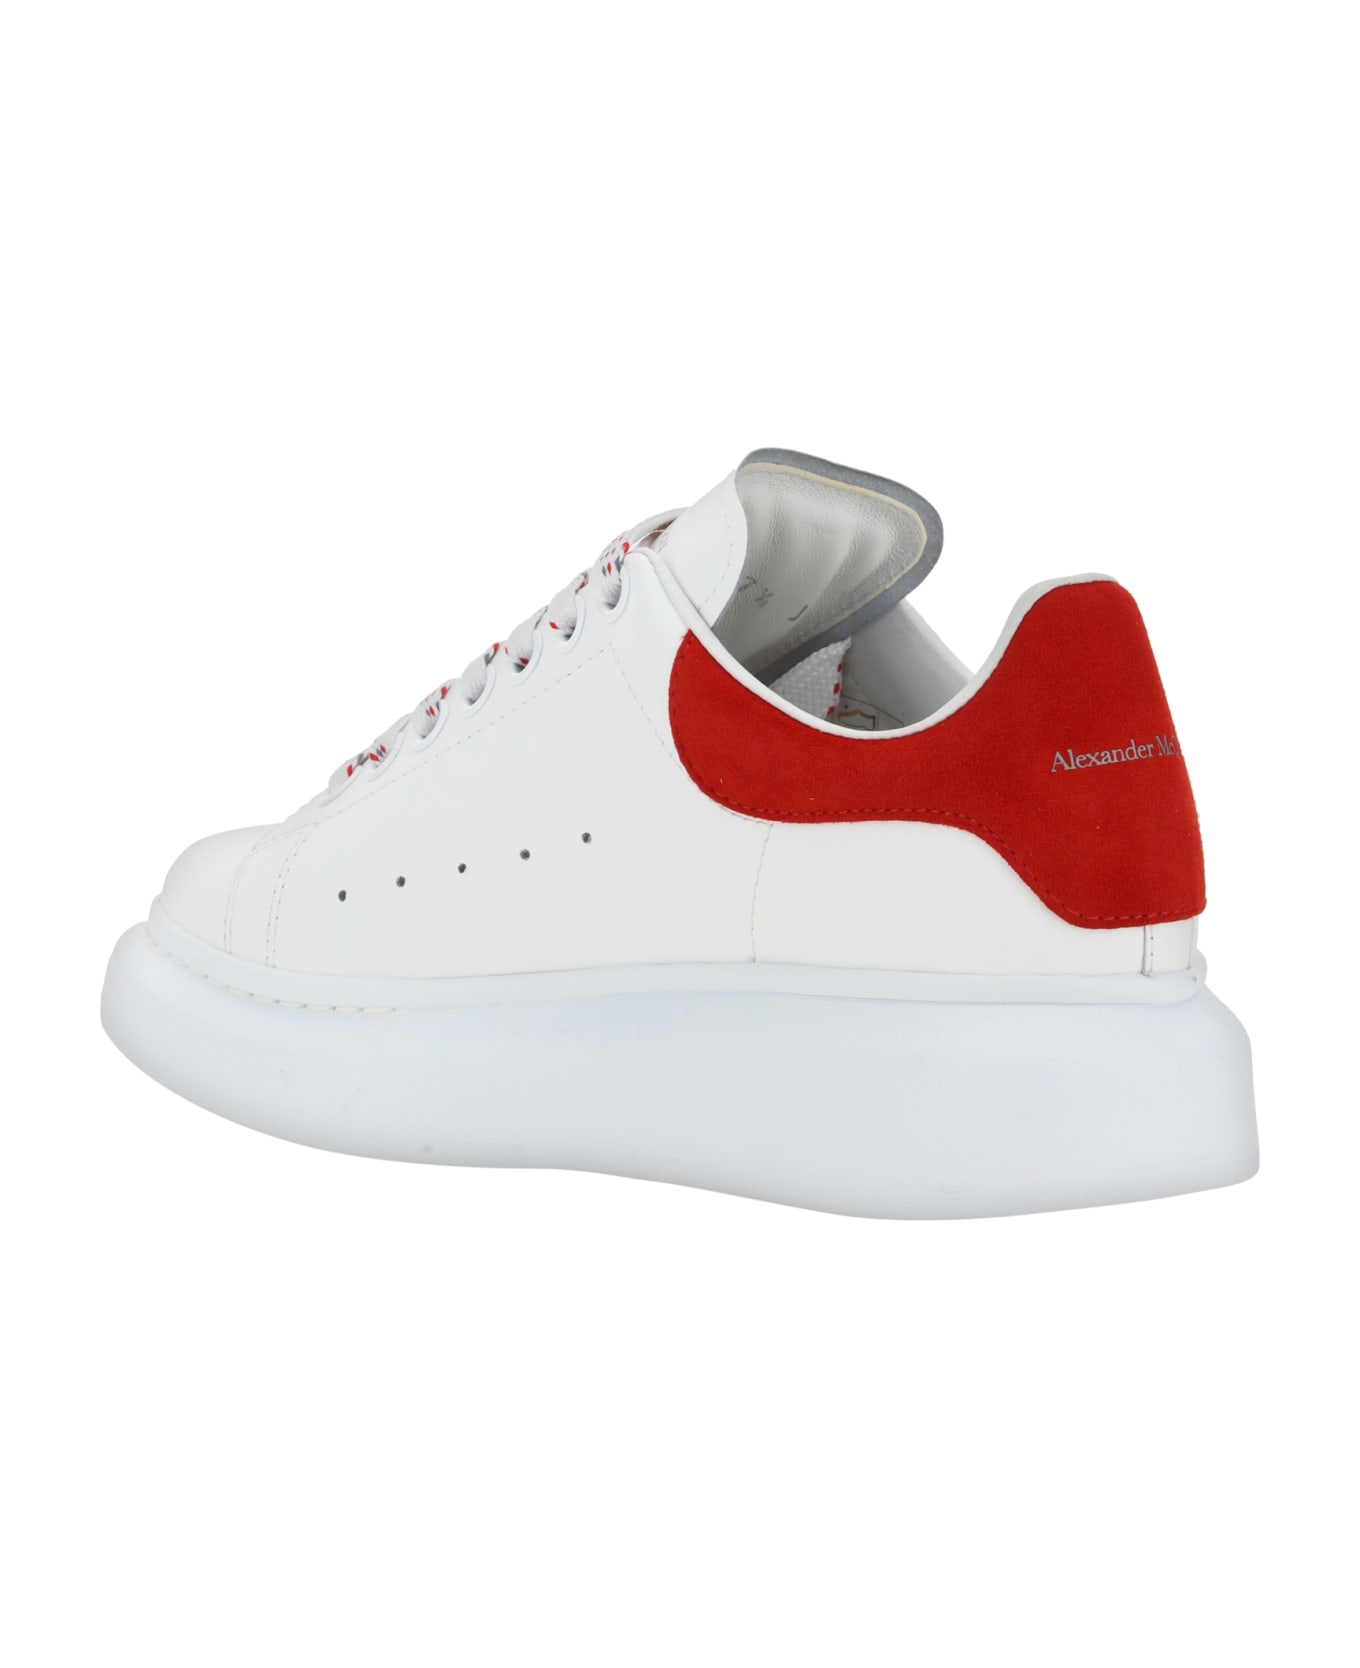 Alexander McQueen Oversized Sneakers In Leather With Contrasting Heel Tab - White Lust Red スニーカー